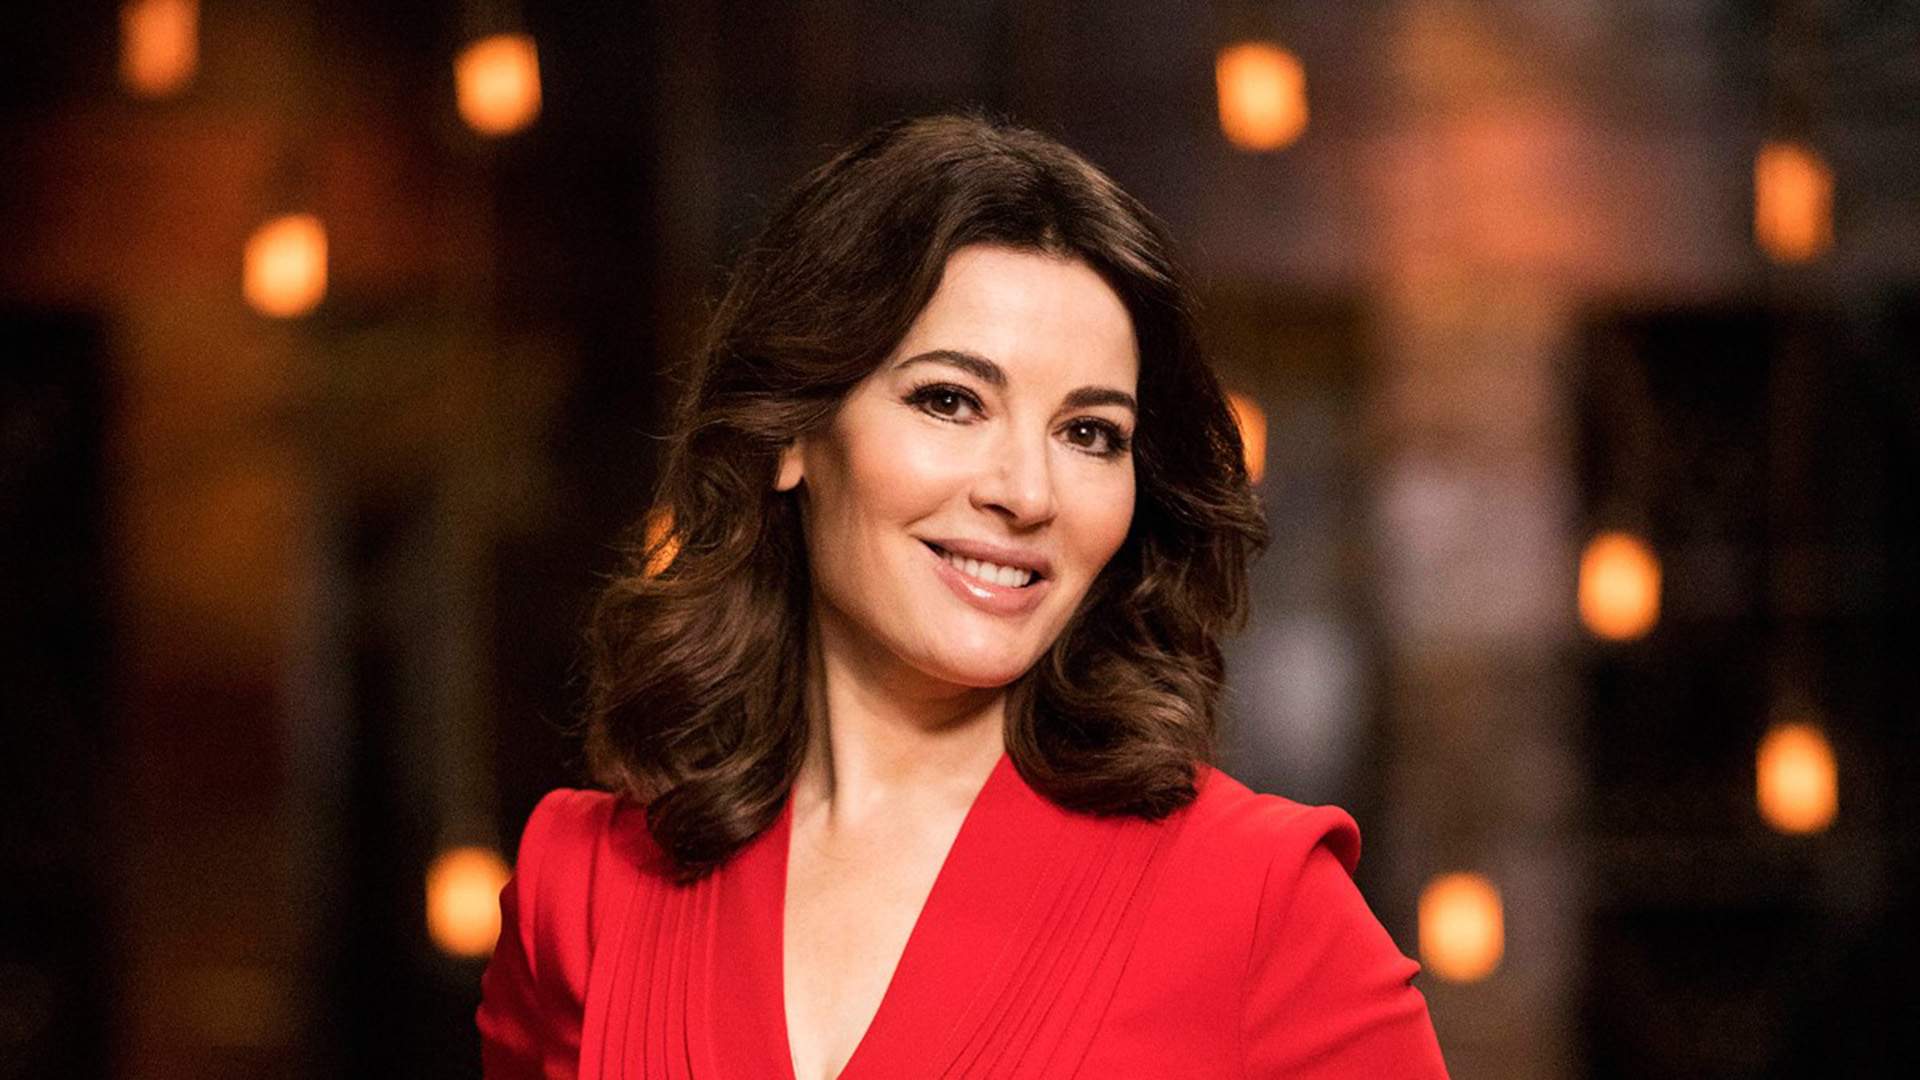 Nigella Lawson Is Returning to Australia This Autumn to Share Her Culinary Secrets